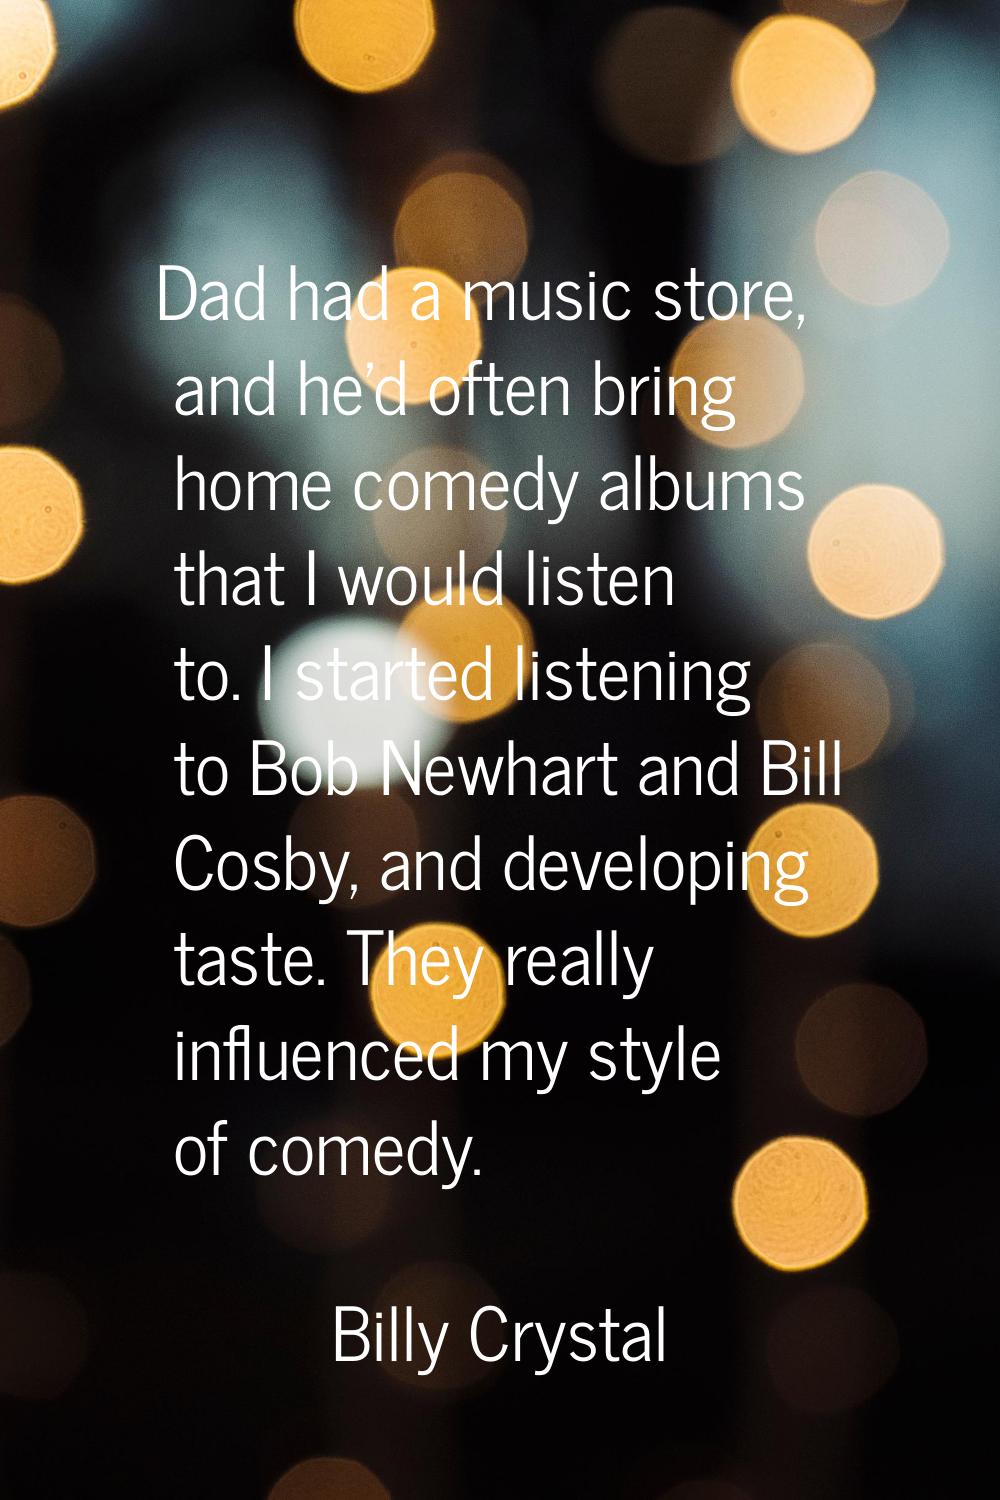 Dad had a music store, and he'd often bring home comedy albums that I would listen to. I started li